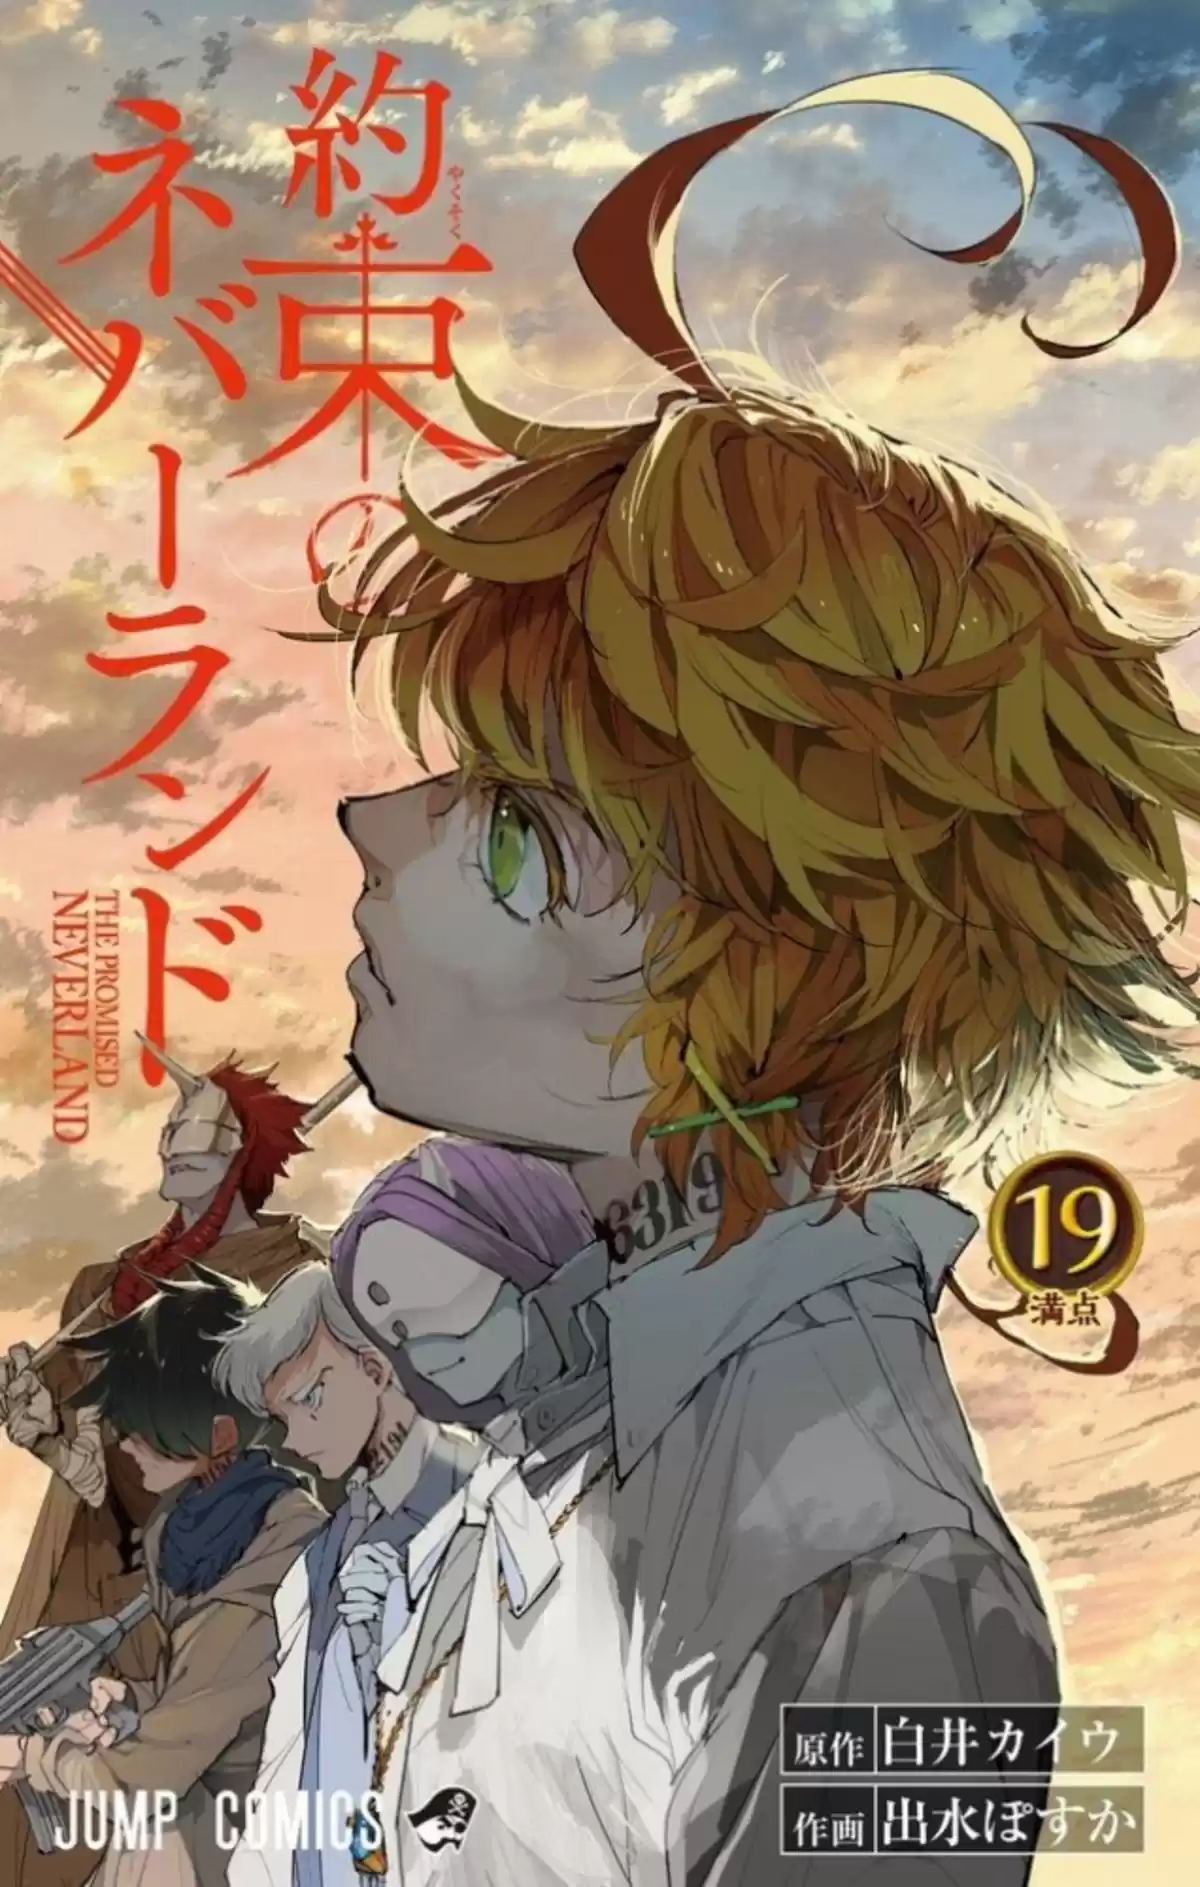 The Promised Neverland Volume 19 page 1